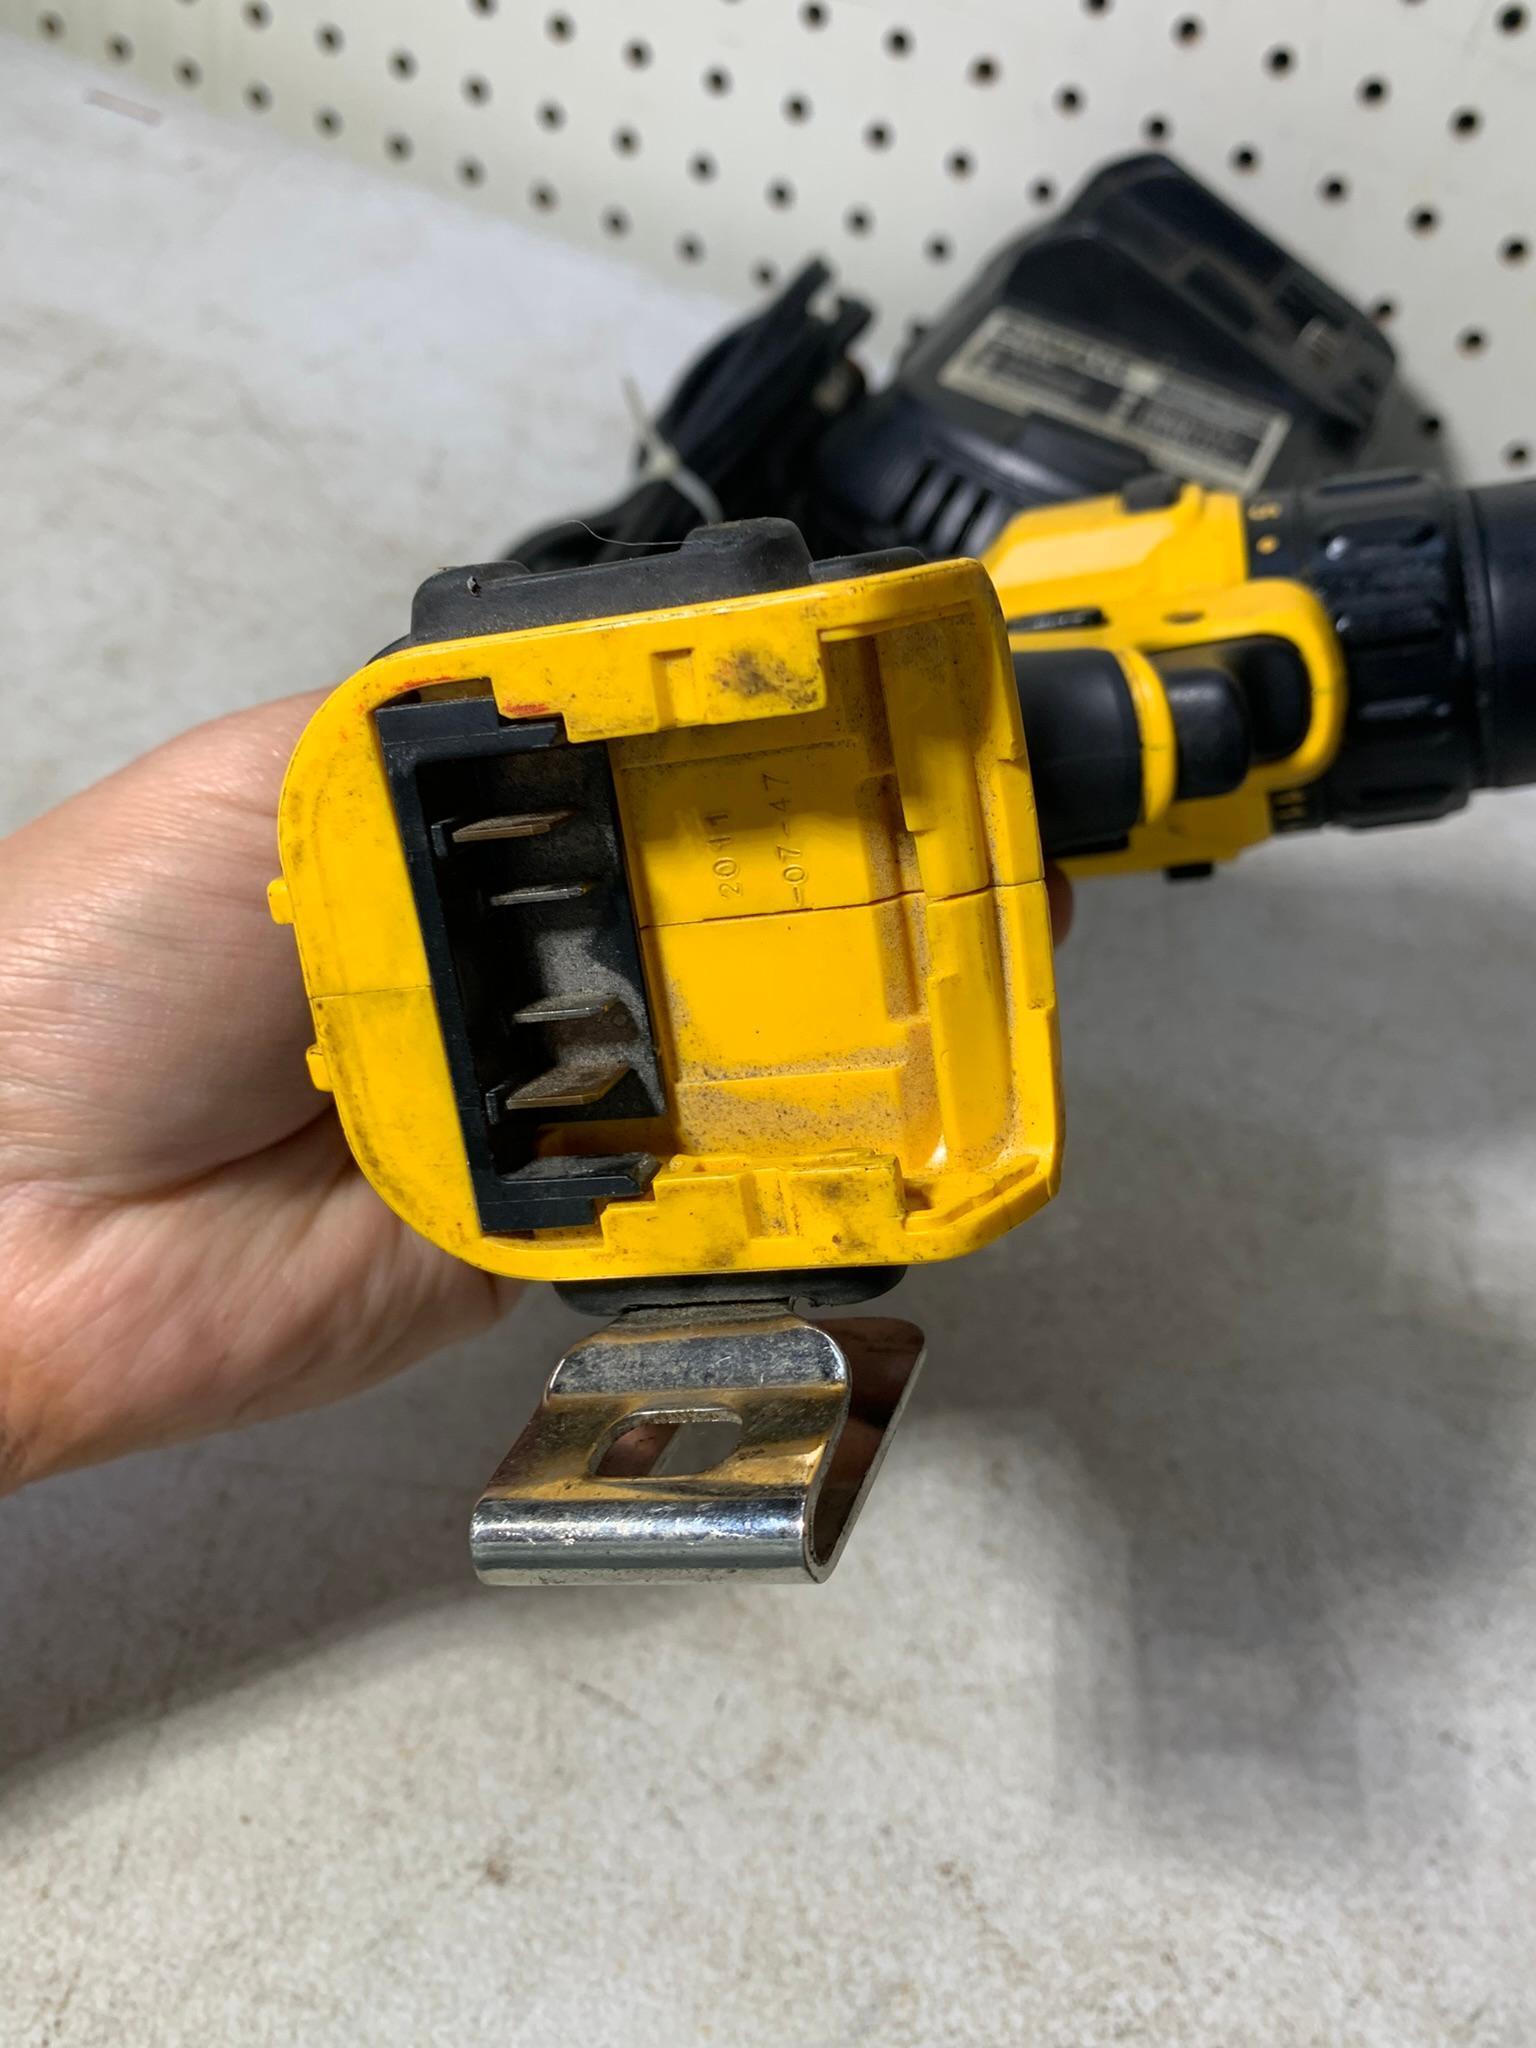 Dewalt Impact Driver, Drill, Battery and Charger